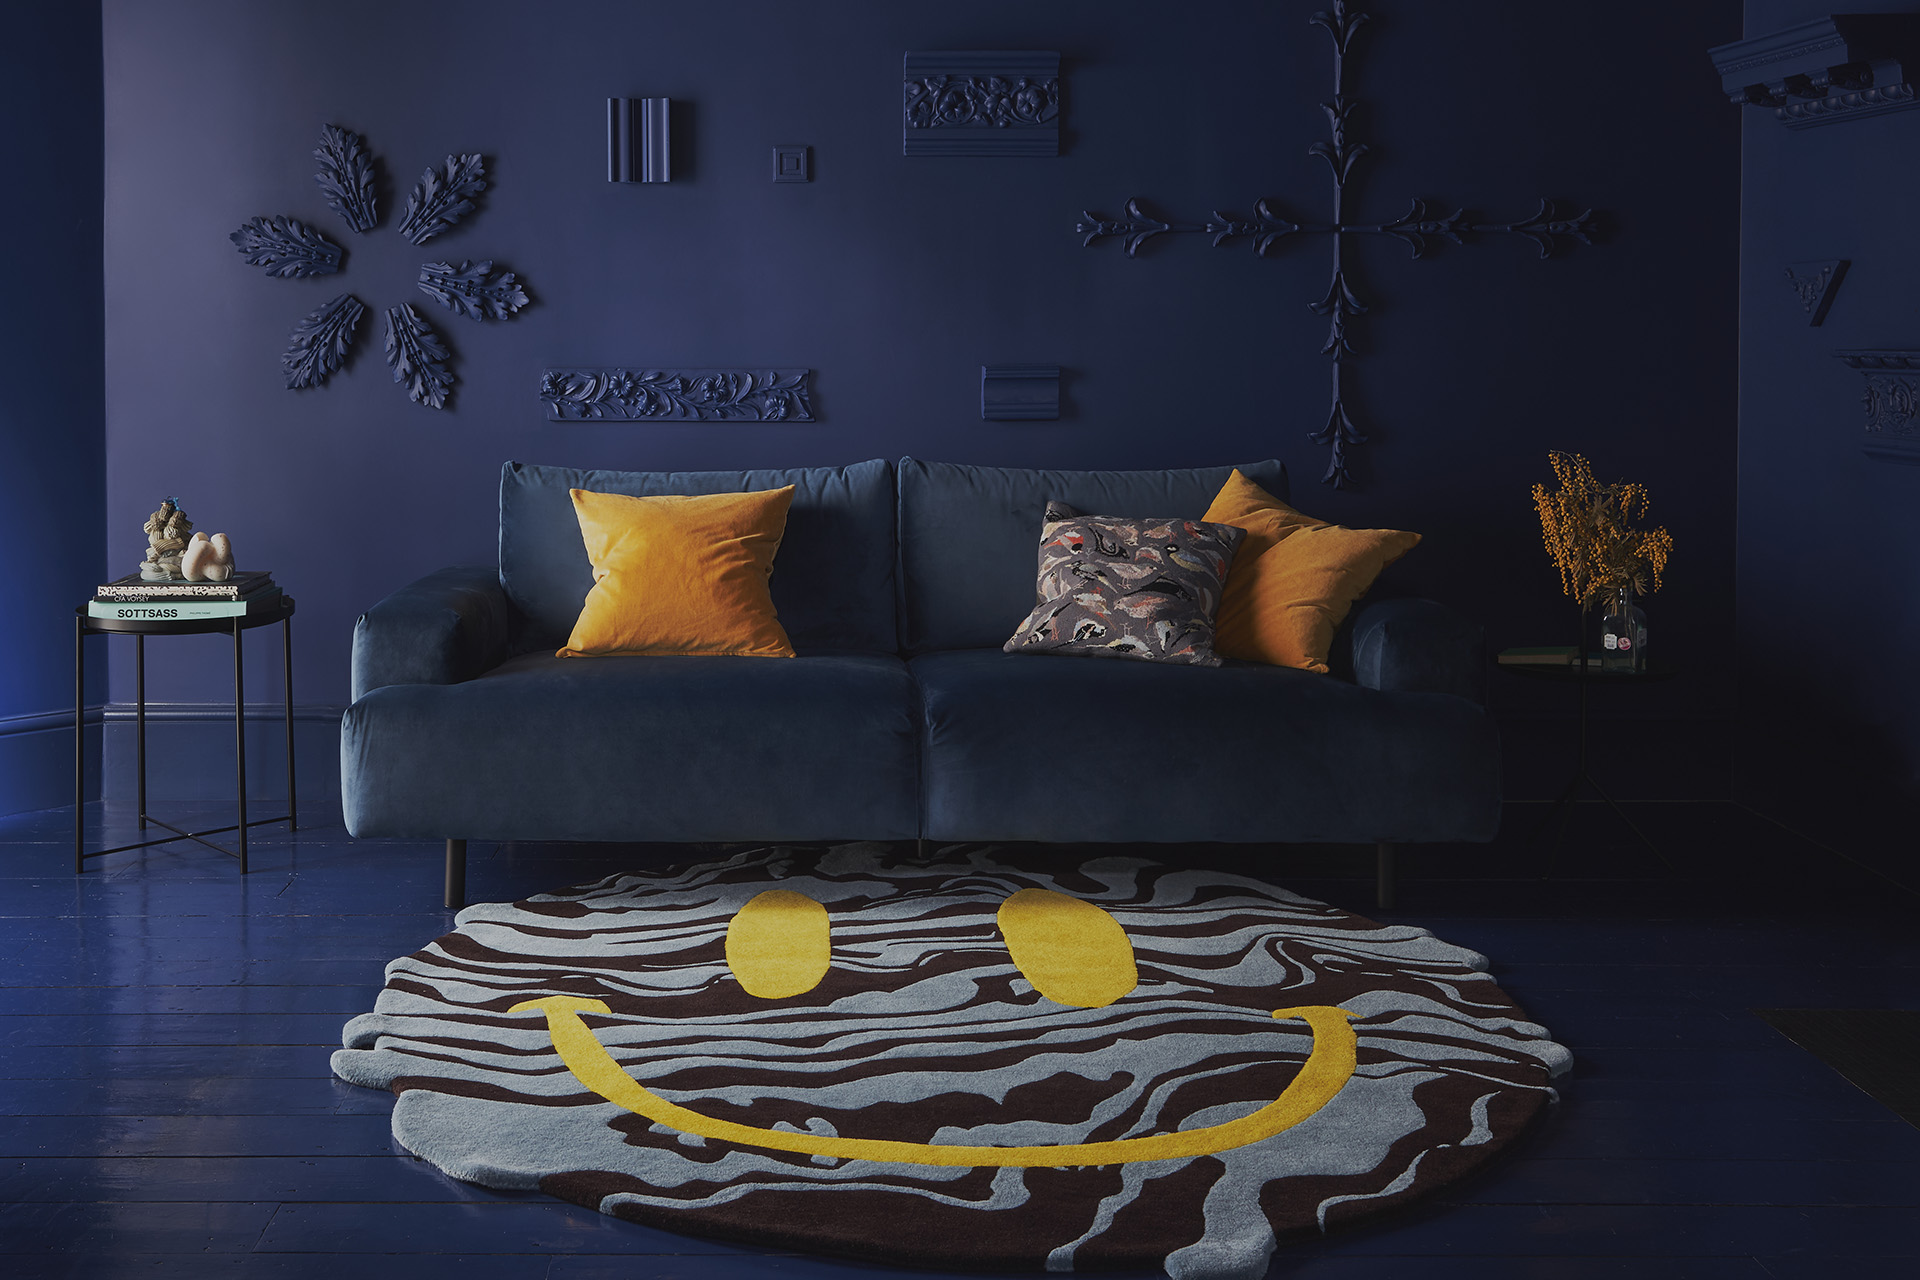 Room with dark blue walls and sofa featuring a large rug with yellow smiley face